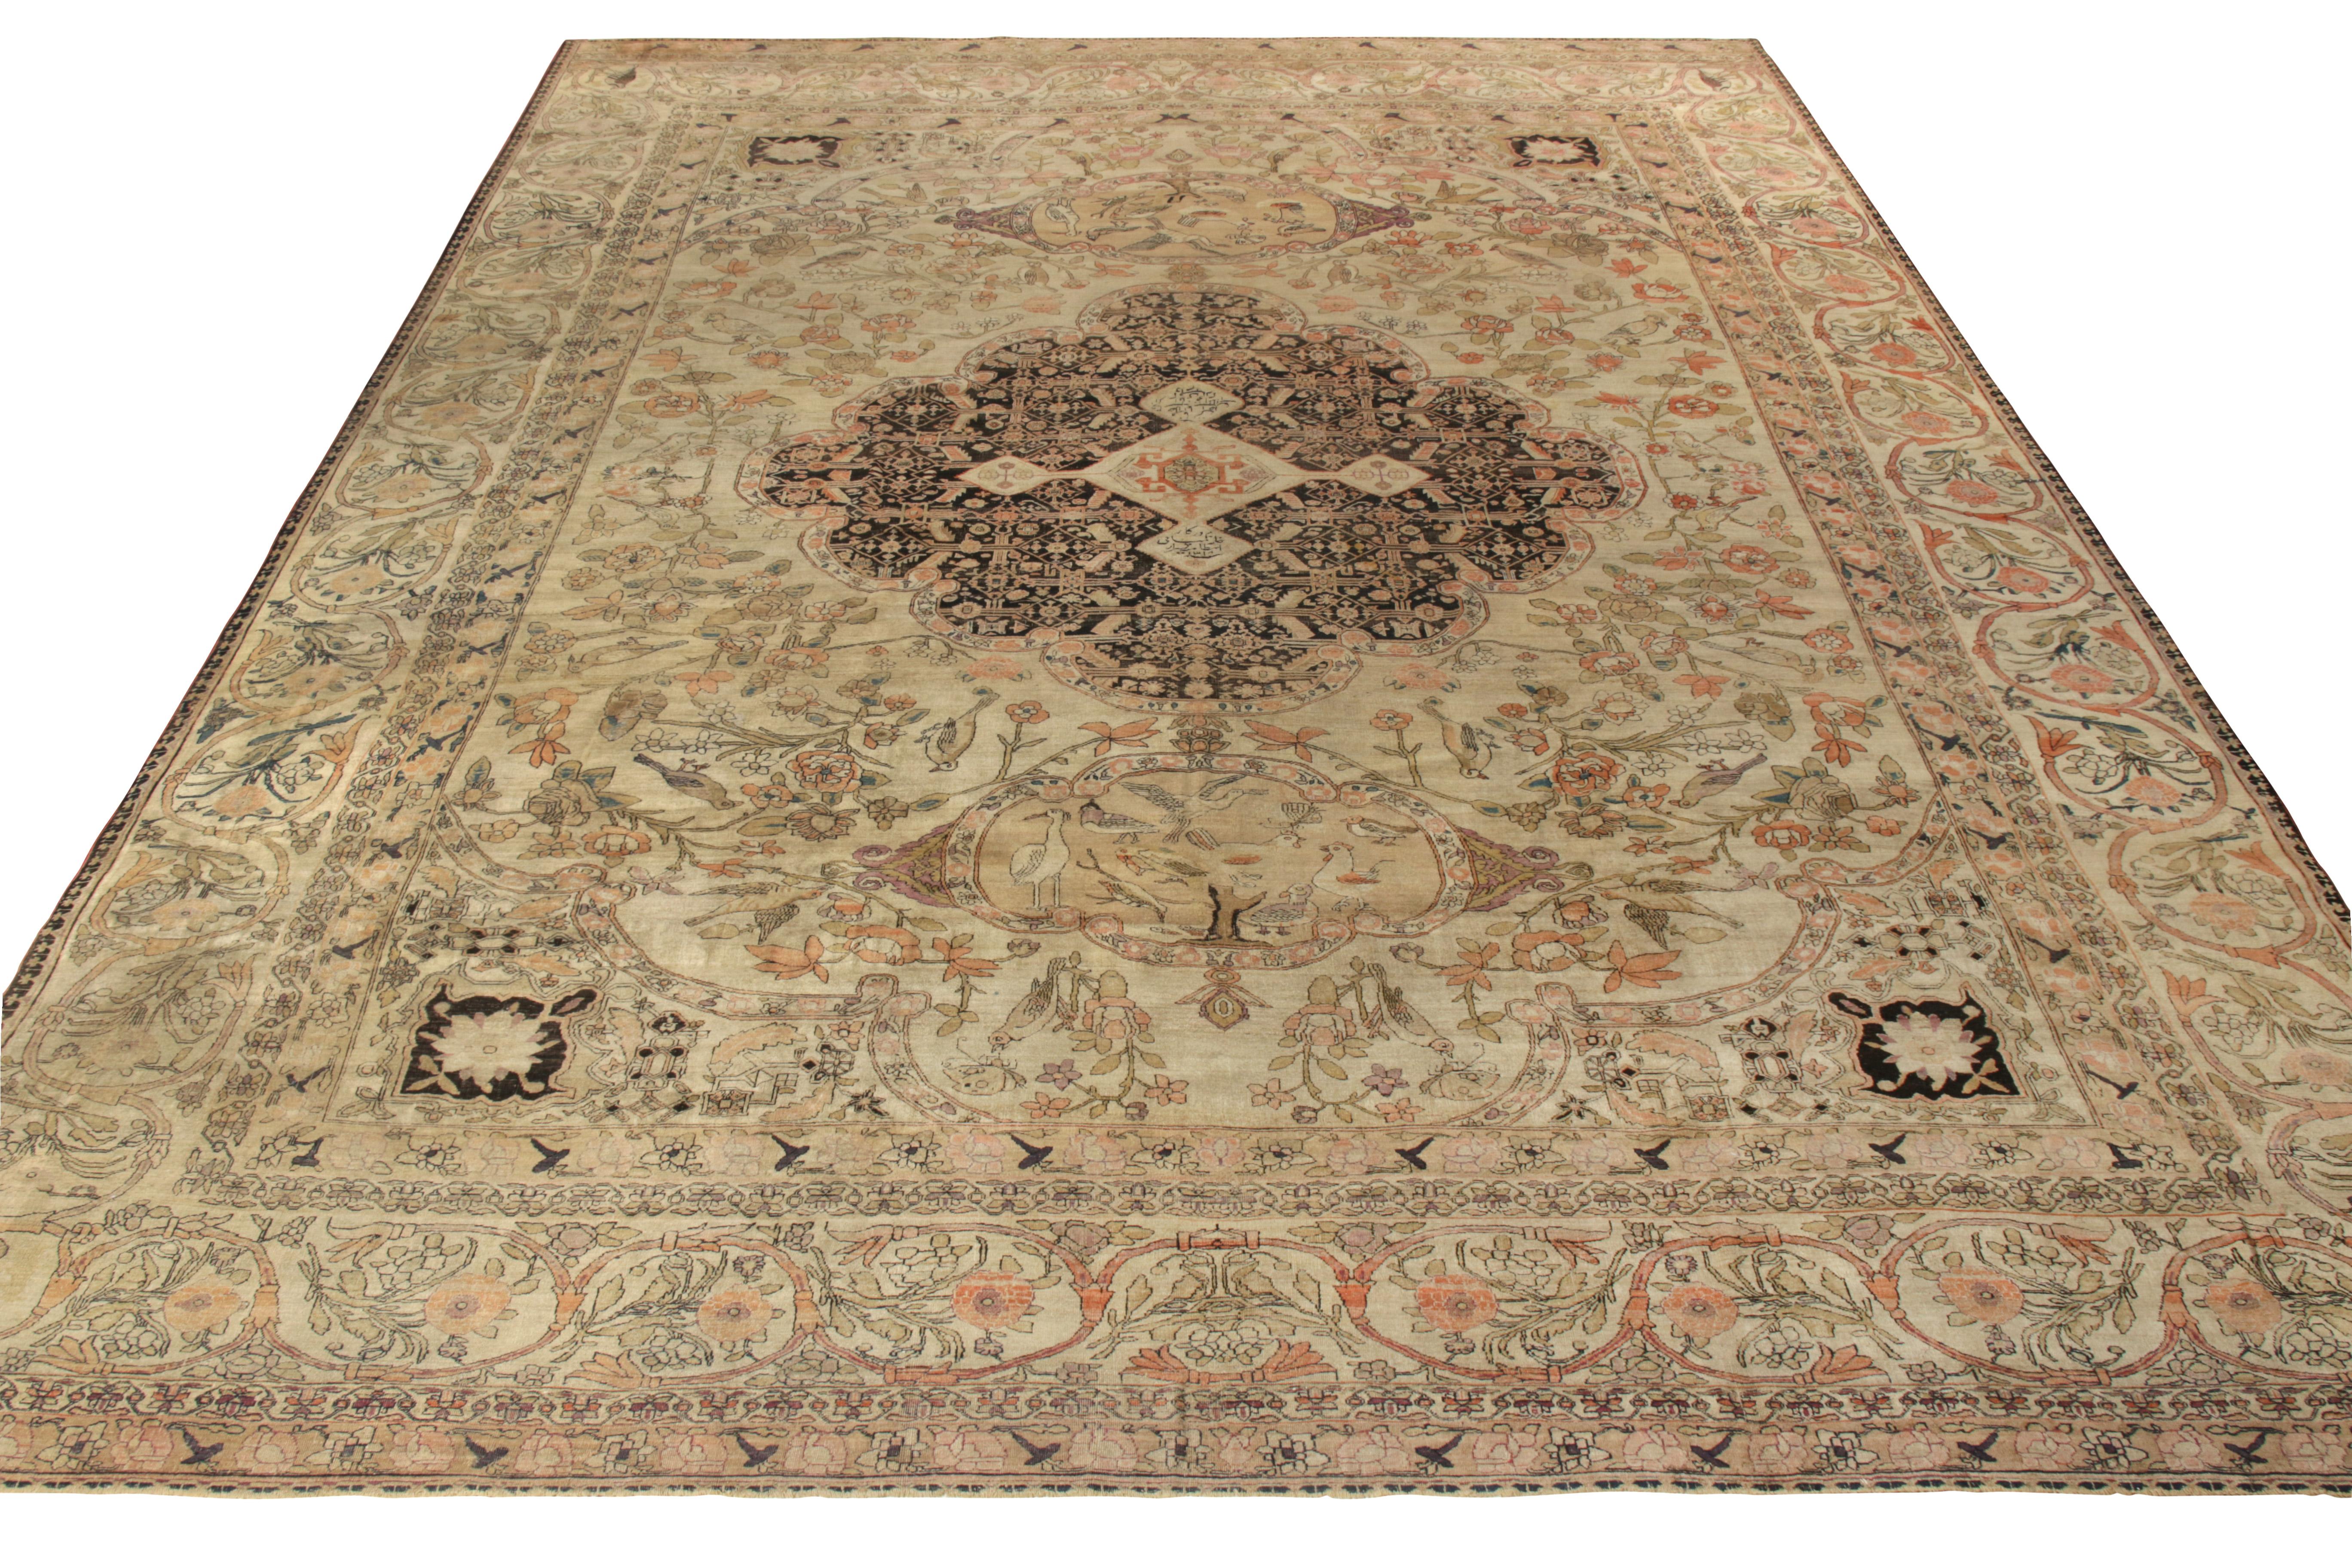 Hand knotted in wool, a 13x17 antique Persian Kerman Lavar joining rug & Kilim’s coveted Antique & Vintage collection. Originating from Persia circa 1920-1930, the piece flourishes in classic sensibilities of the early 19th century. Not only